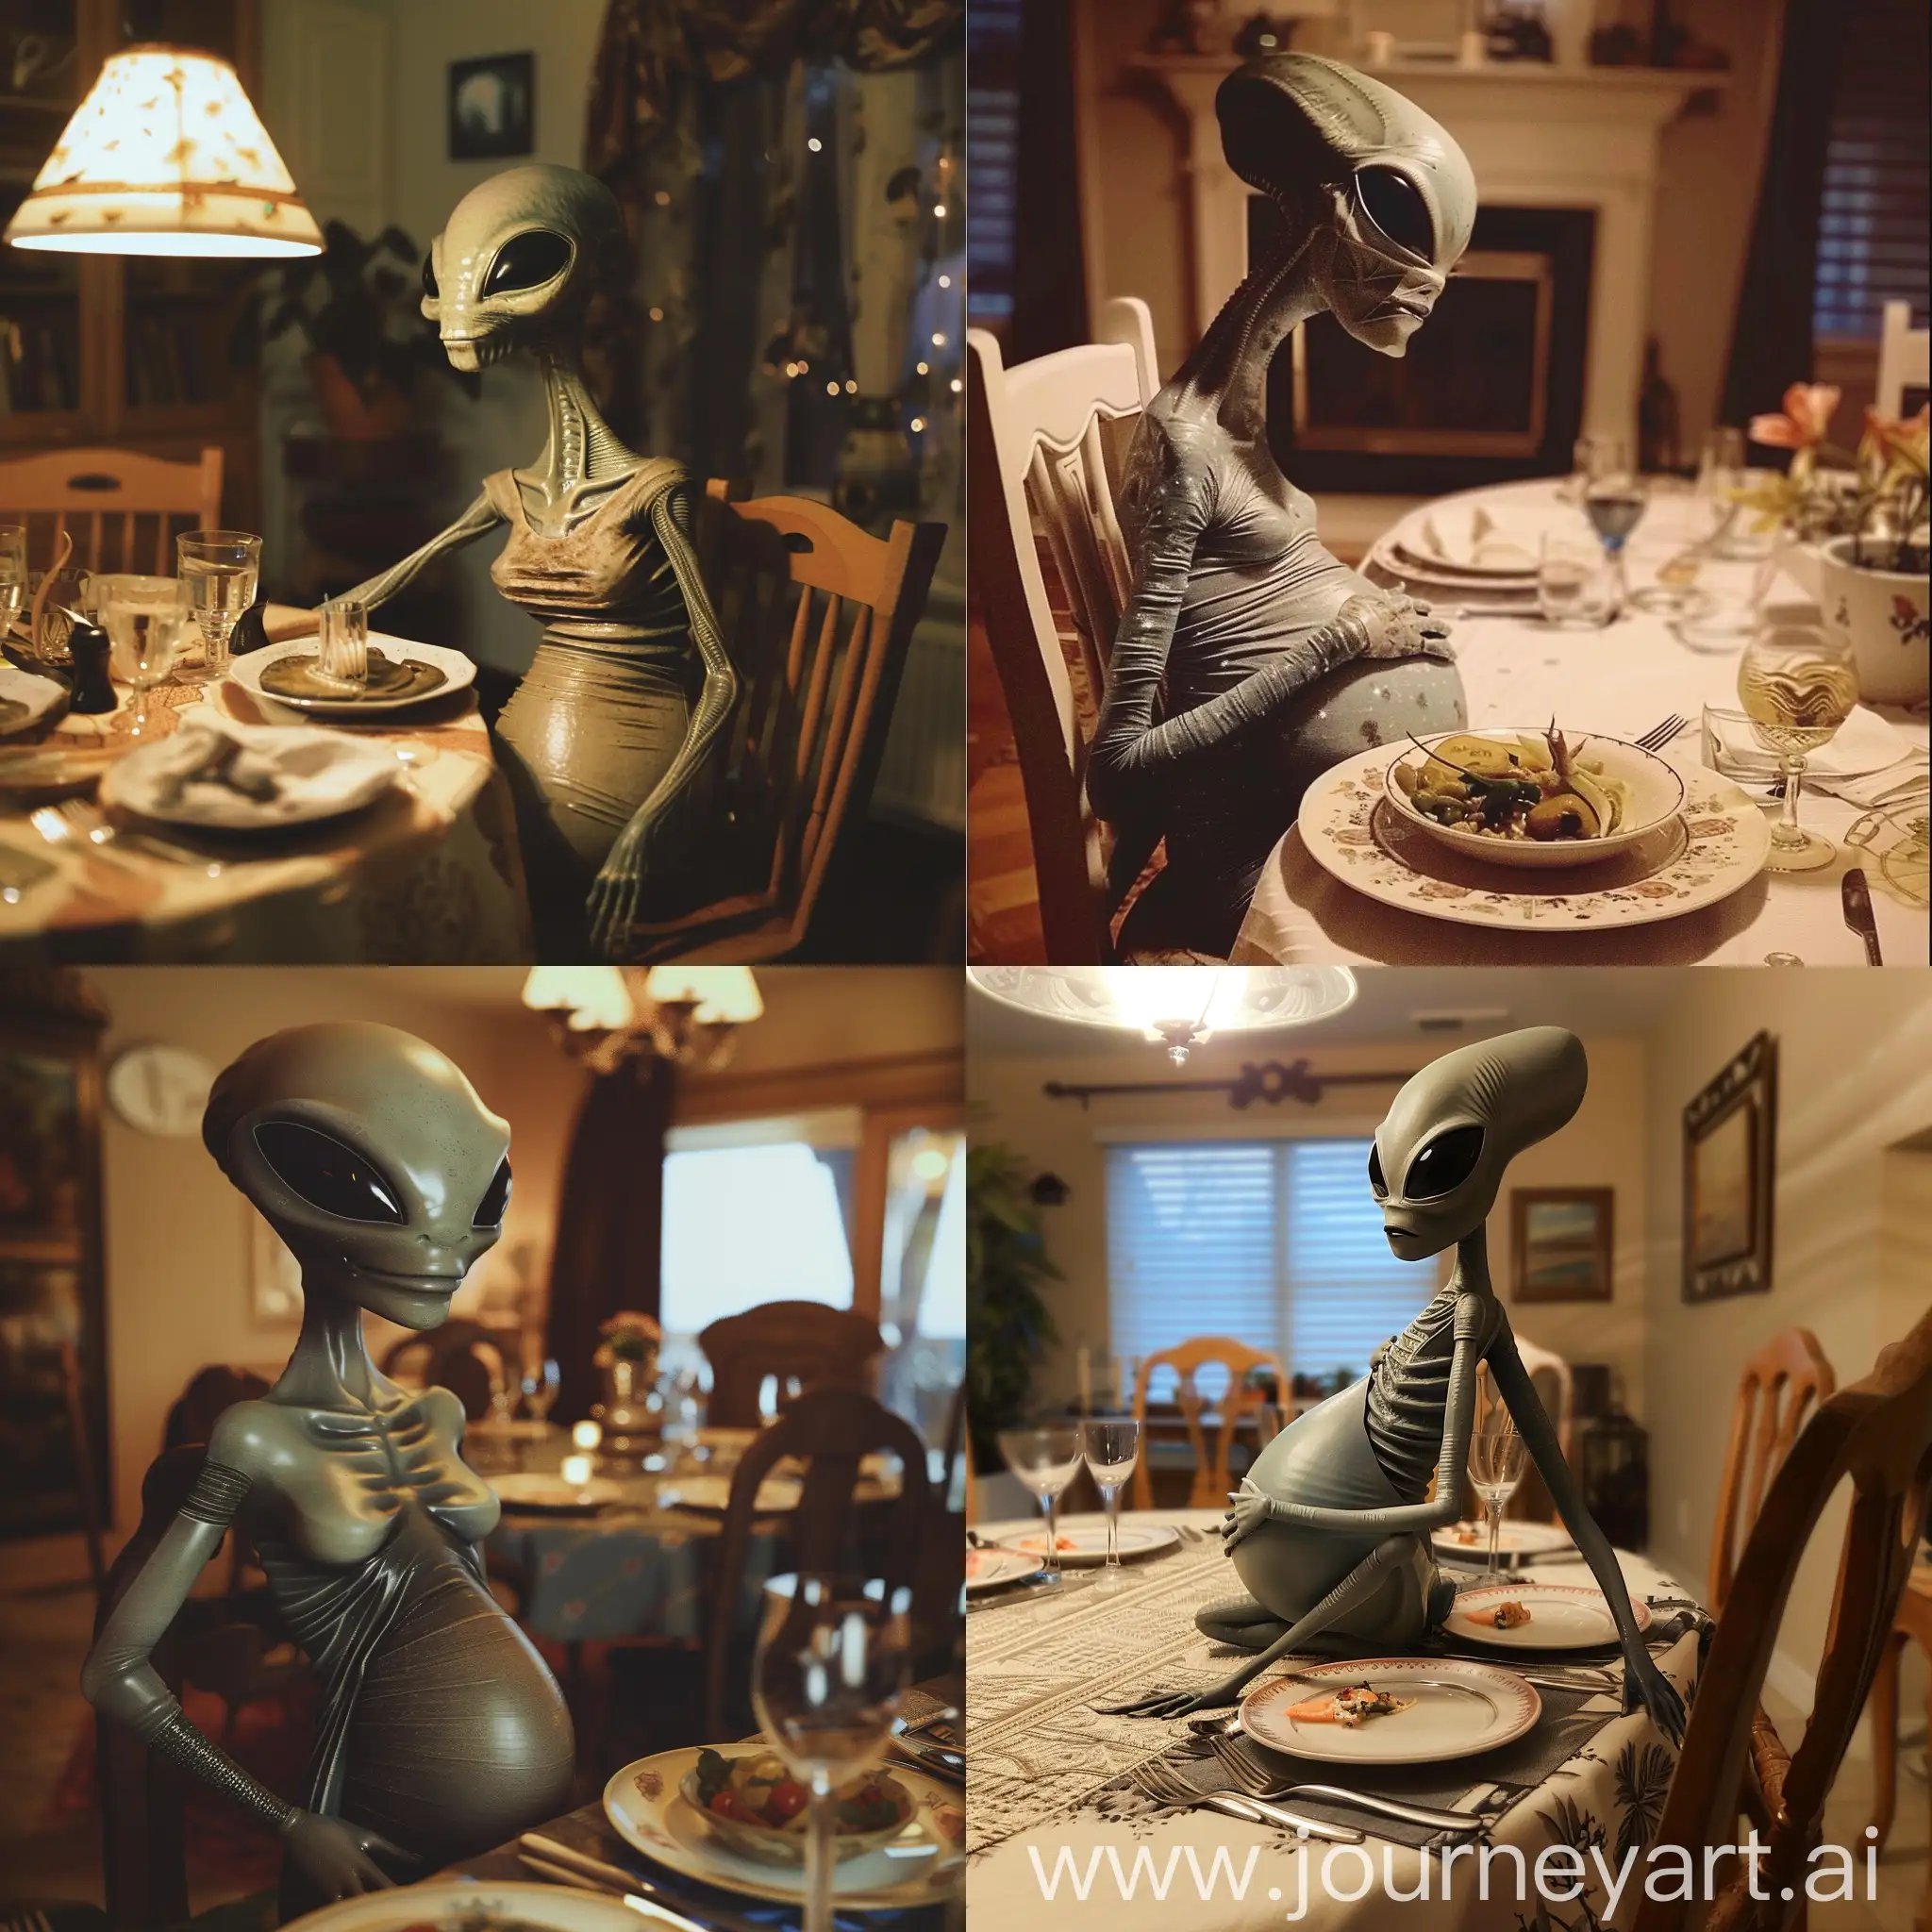 Pregnant-Gray-Alien-Date-Waiting-at-Dinner-Table